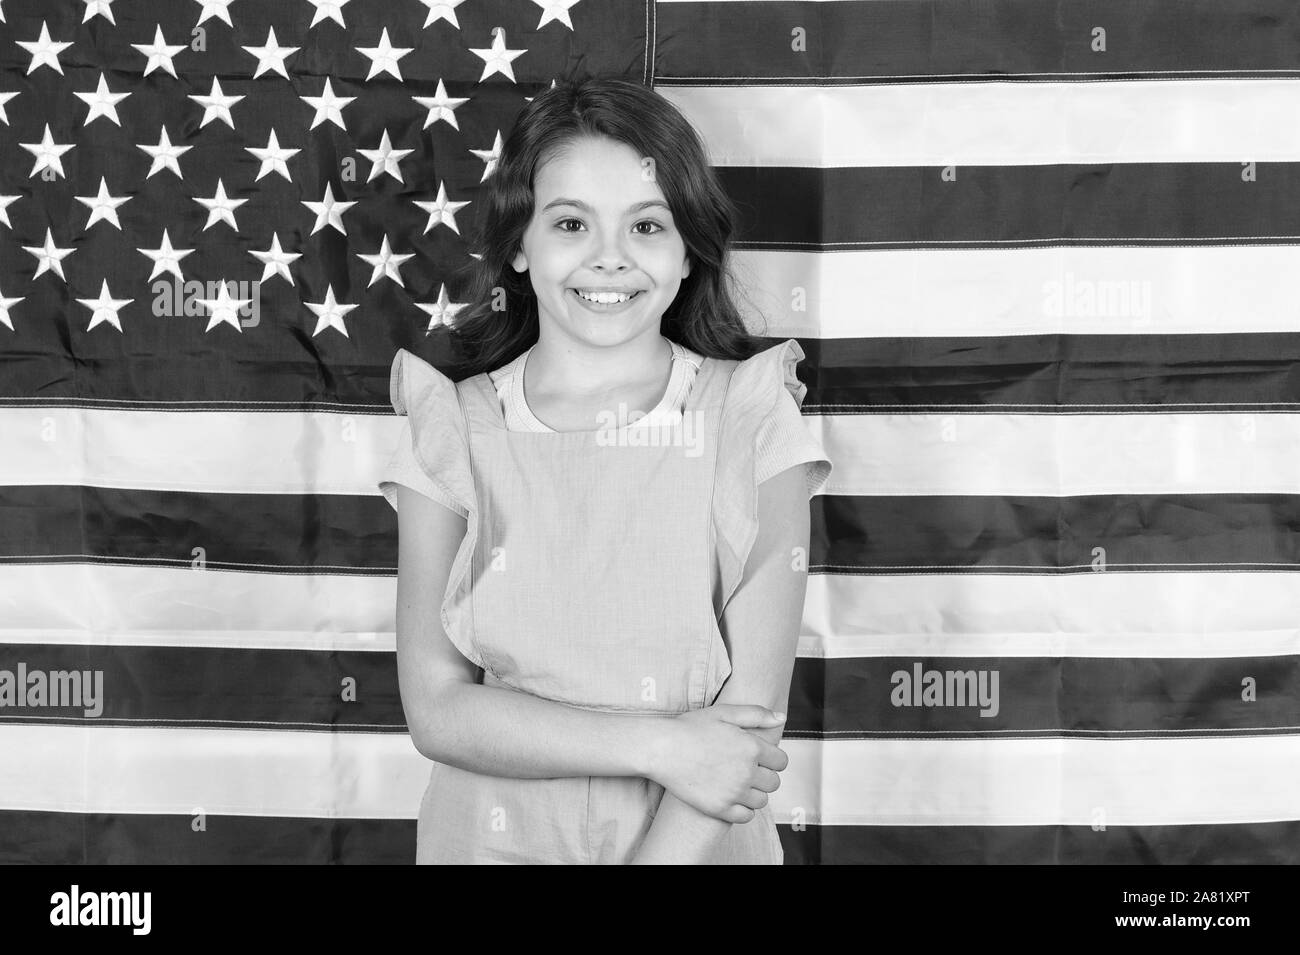 Let freedom reign. Independence is happiness. Independence day holiday. Americans celebrate independence day. Little girl with USA flag. Study english language. Education abroad. Patriotic upbringing. Stock Photo